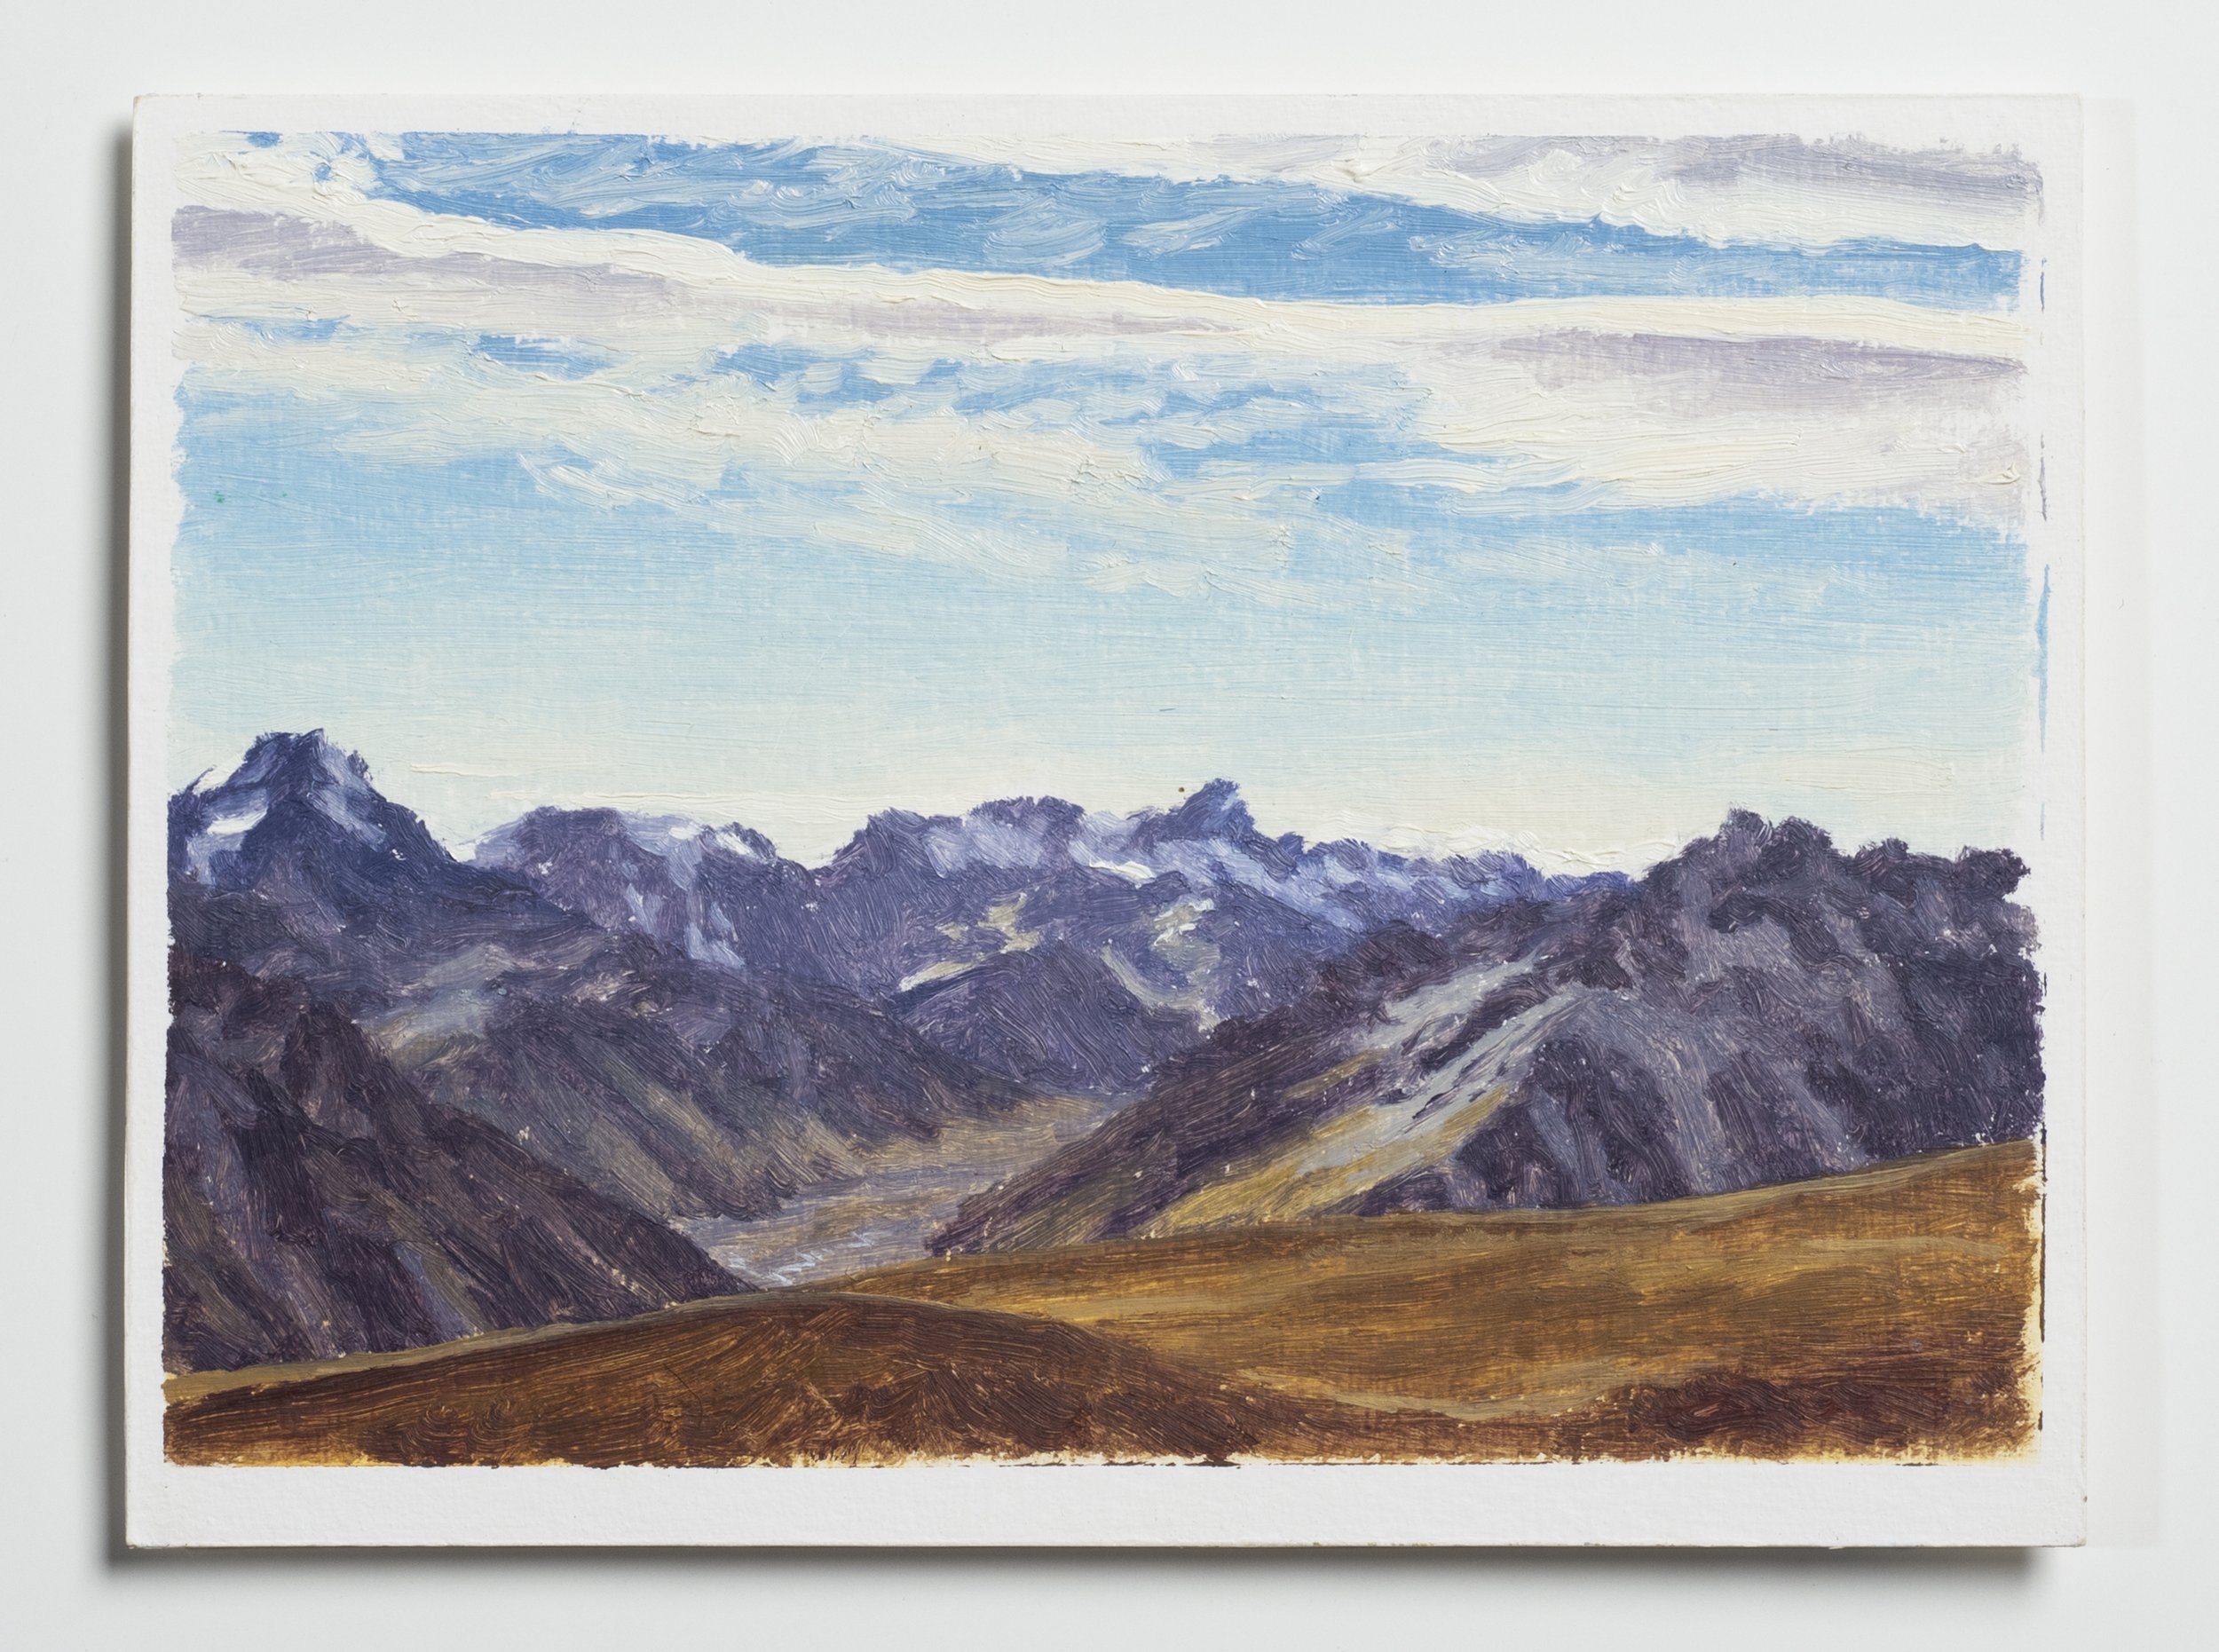  Day 109 - Southern Alps, from Stag Saddle Ridge  Canterbury 